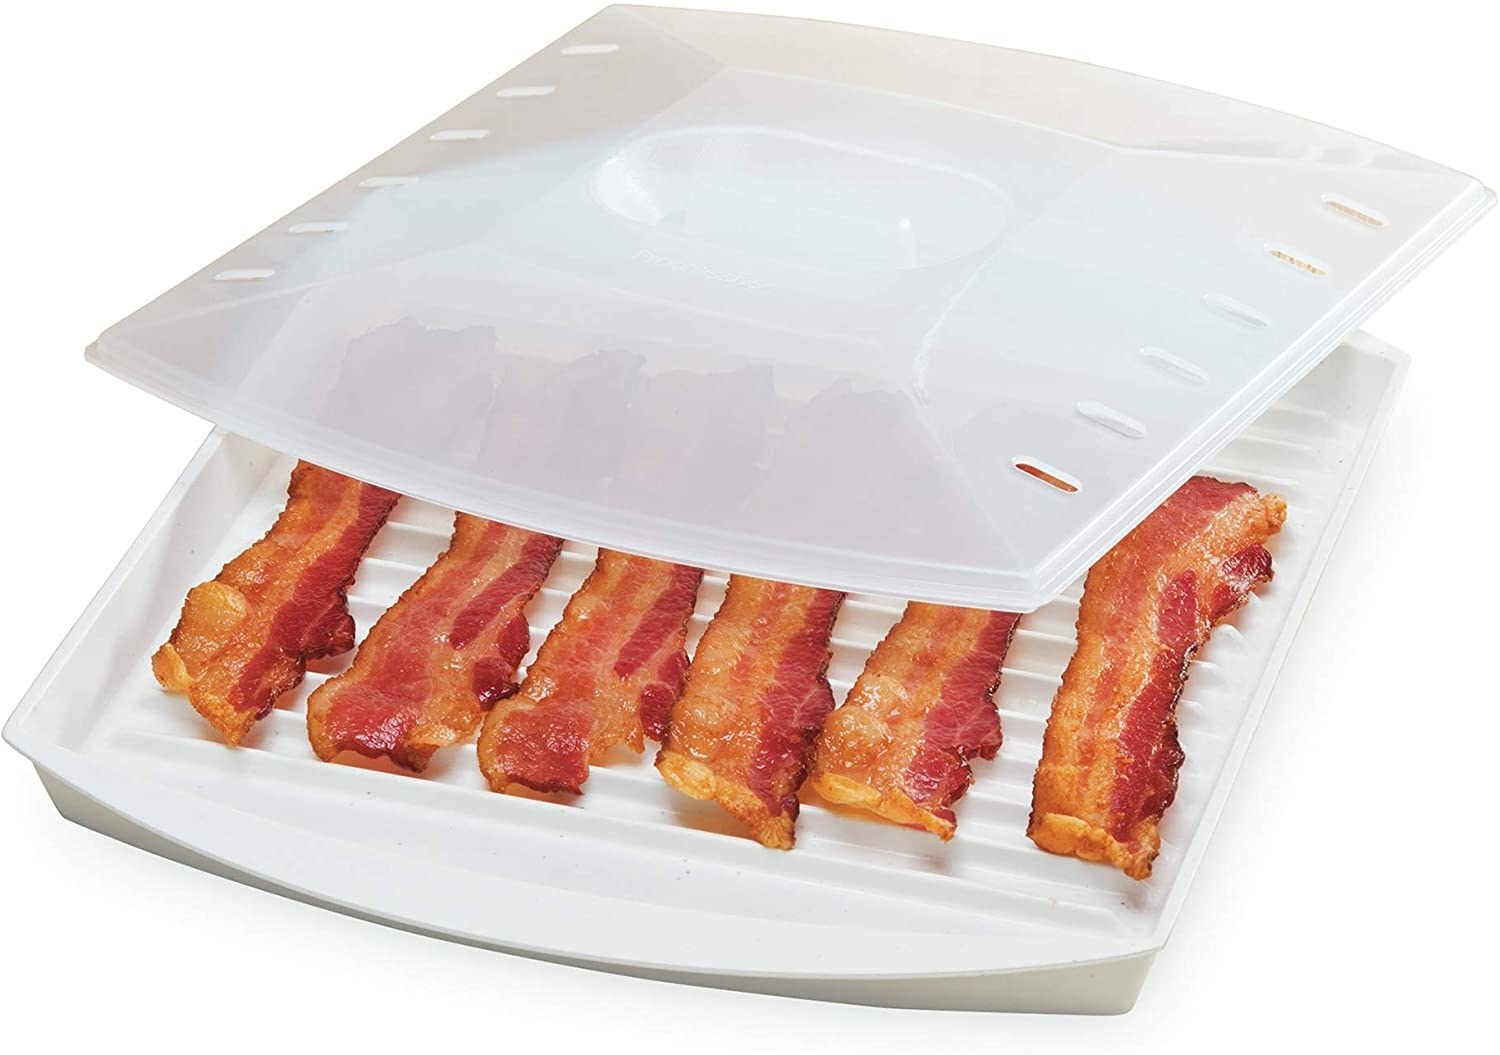 White bacon grill with lid covering six strips of pink bacon